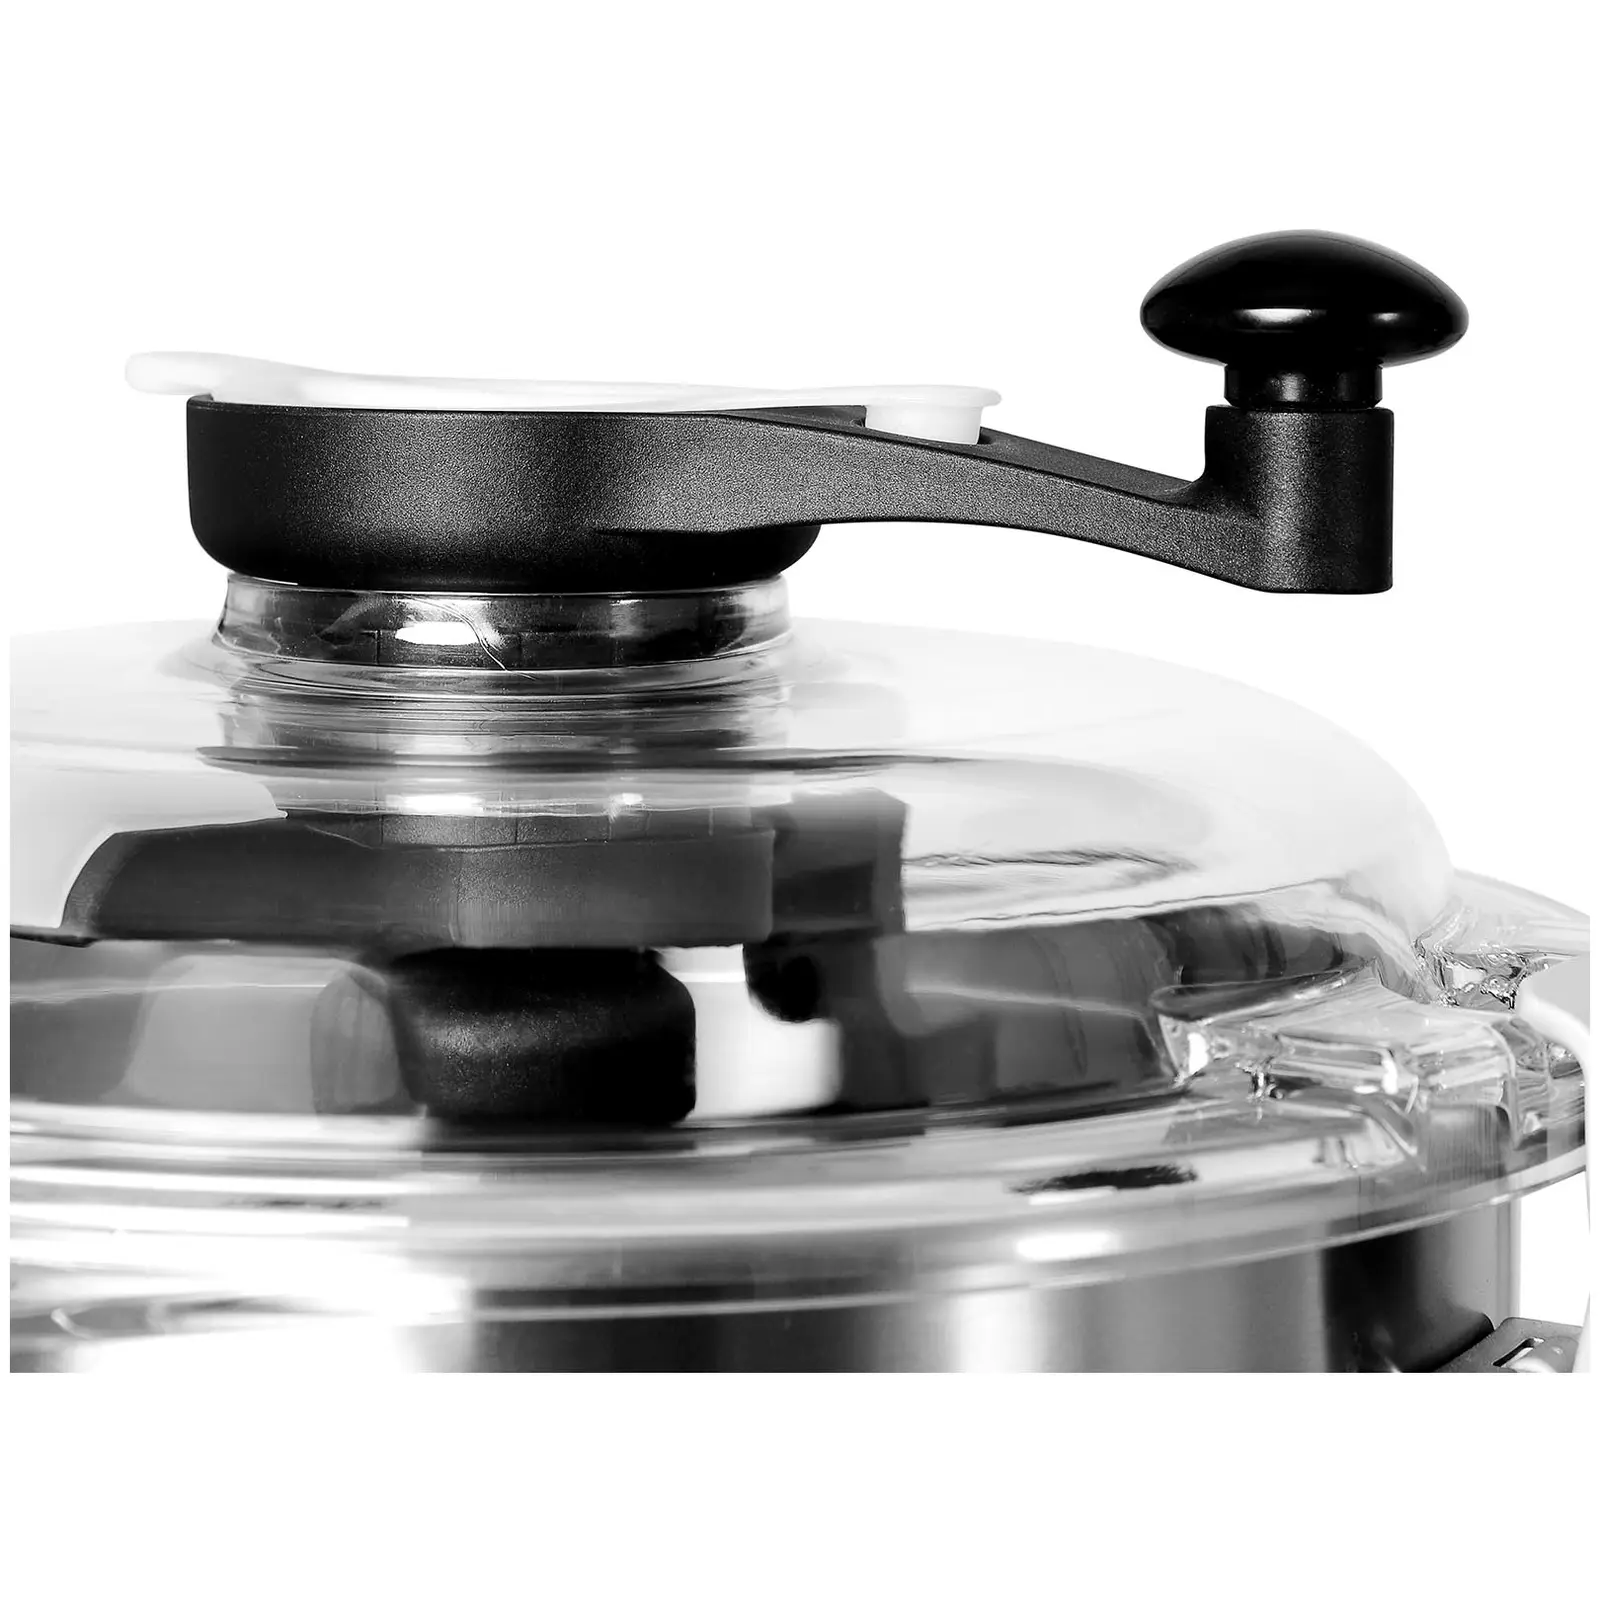 Bowl Cutter - 1500/2200 rpm - Royal Catering - 18 L